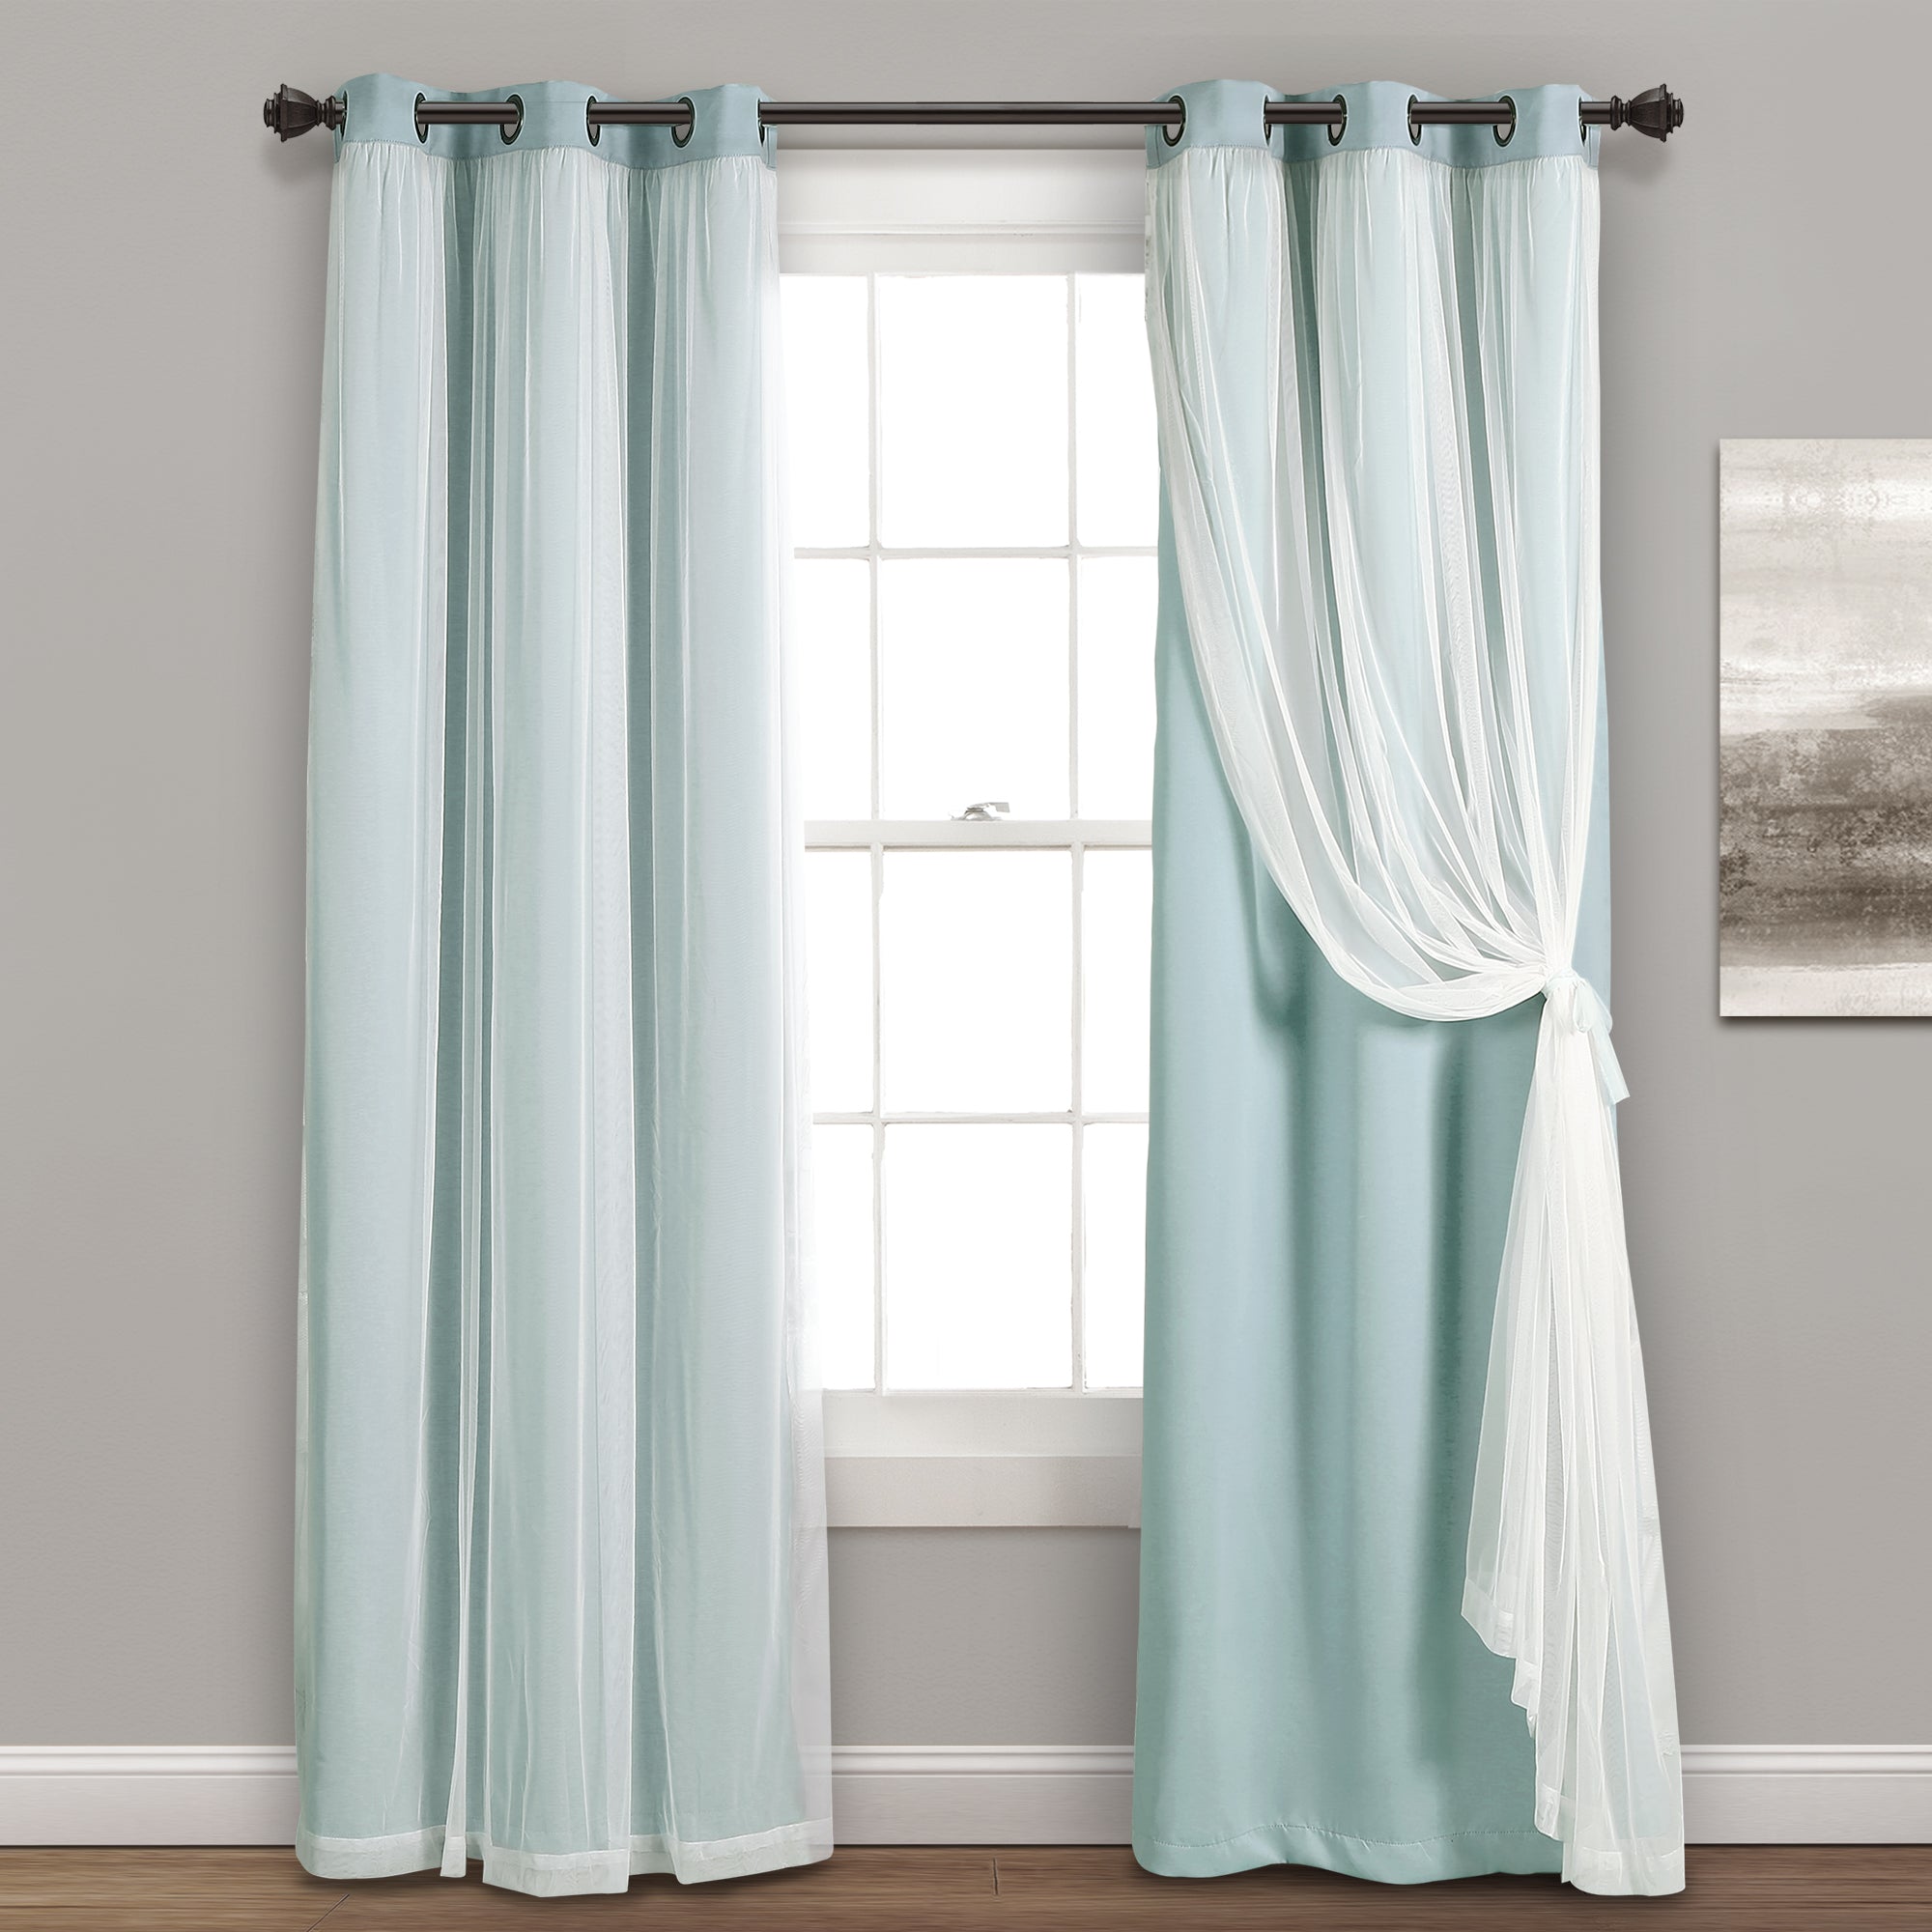 Lush Decor Grommet Sheer Panels W Insulated Blackout Lining